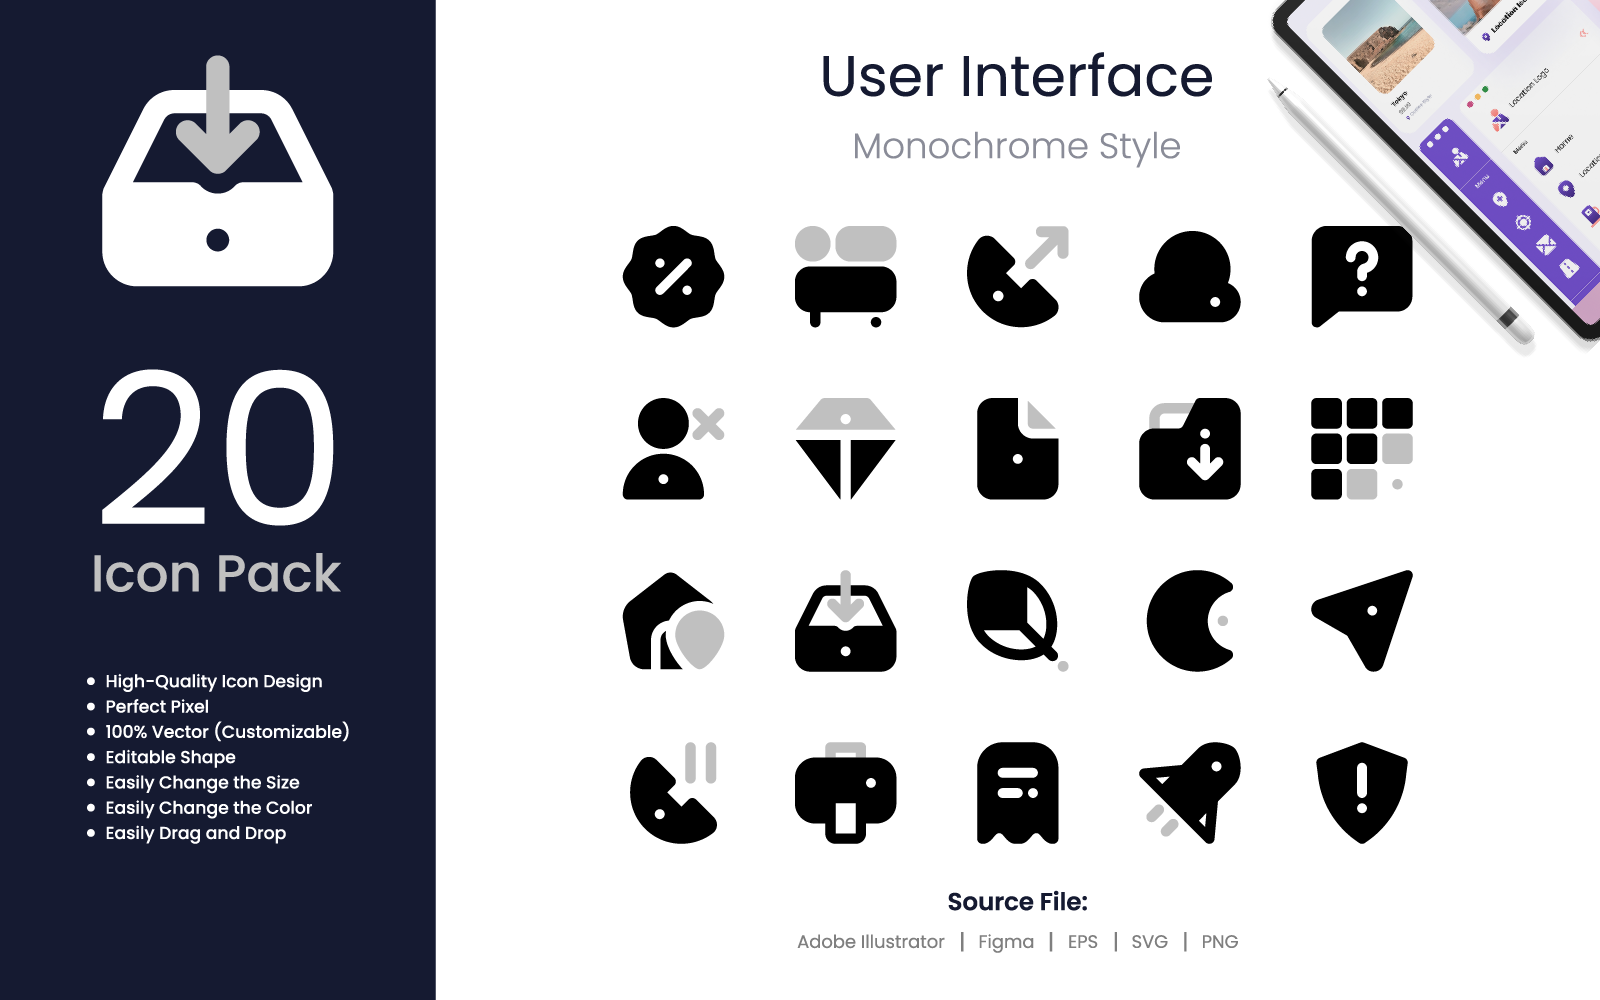 User Interface Icon Pack Monochrome Style 2